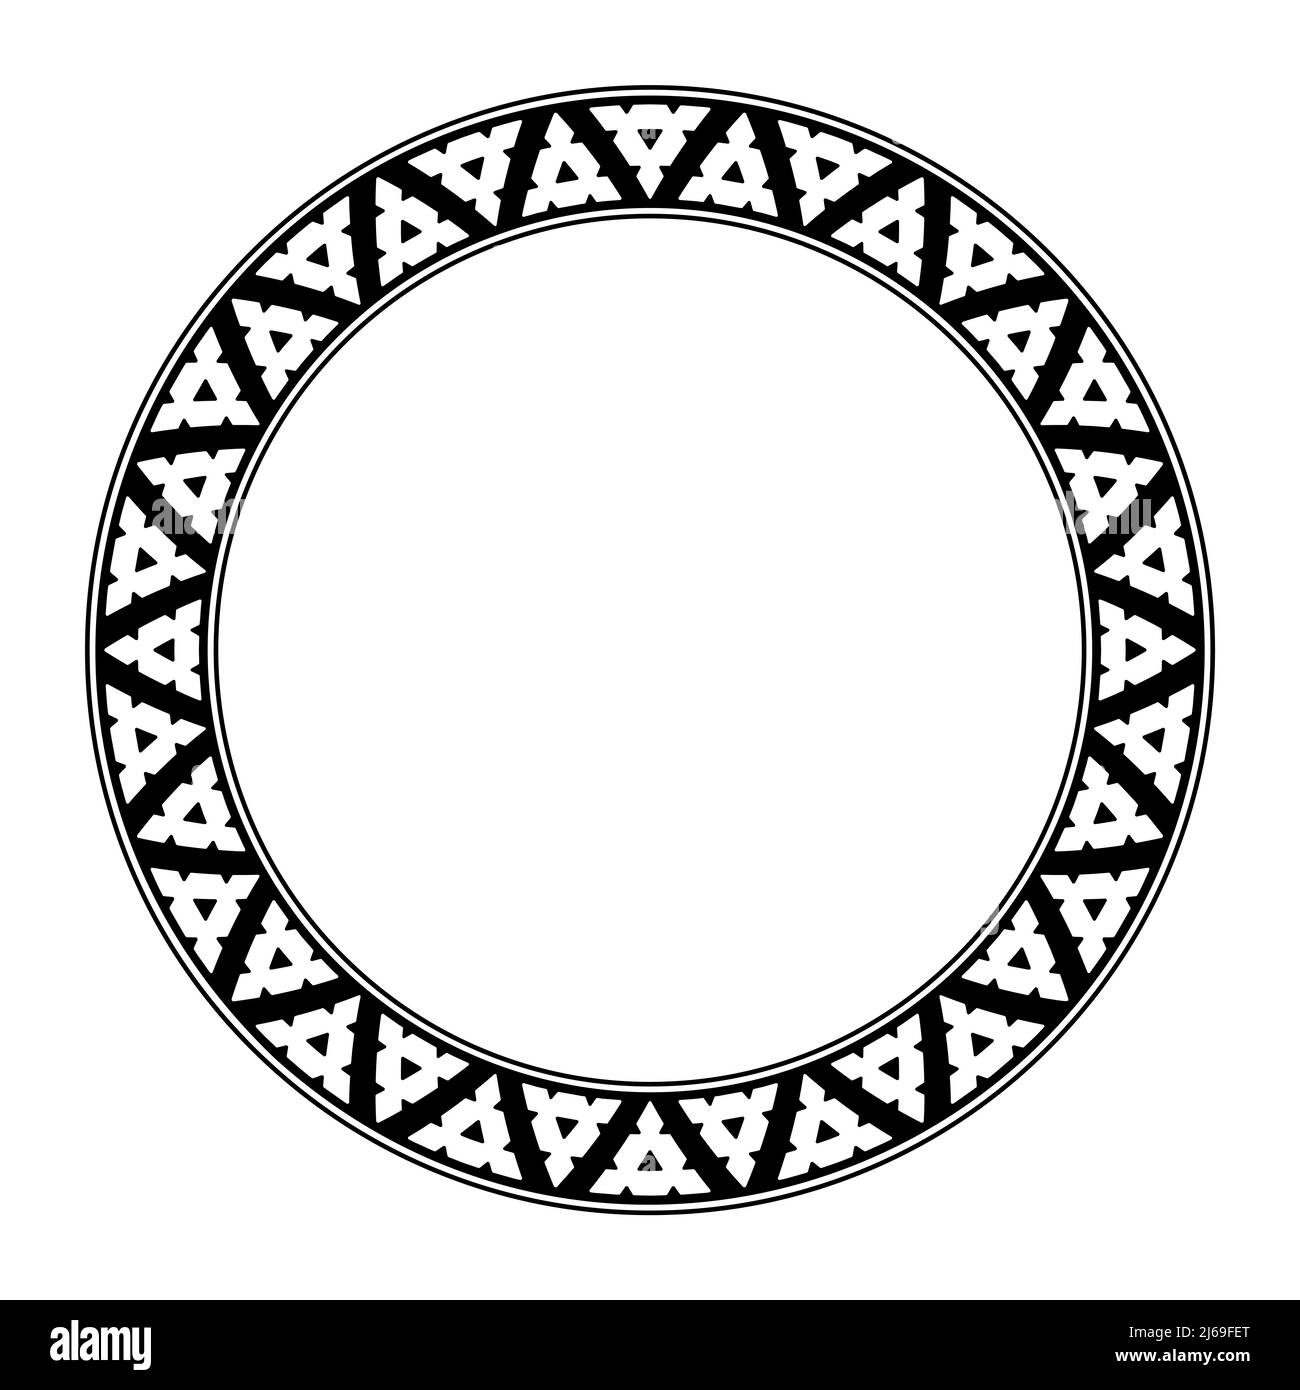 Serrated triangle pattern, circle frame based on traditional Melanesian inlaid patterns. White triangles, arranged alternately, with cut out areas. Stock Photo